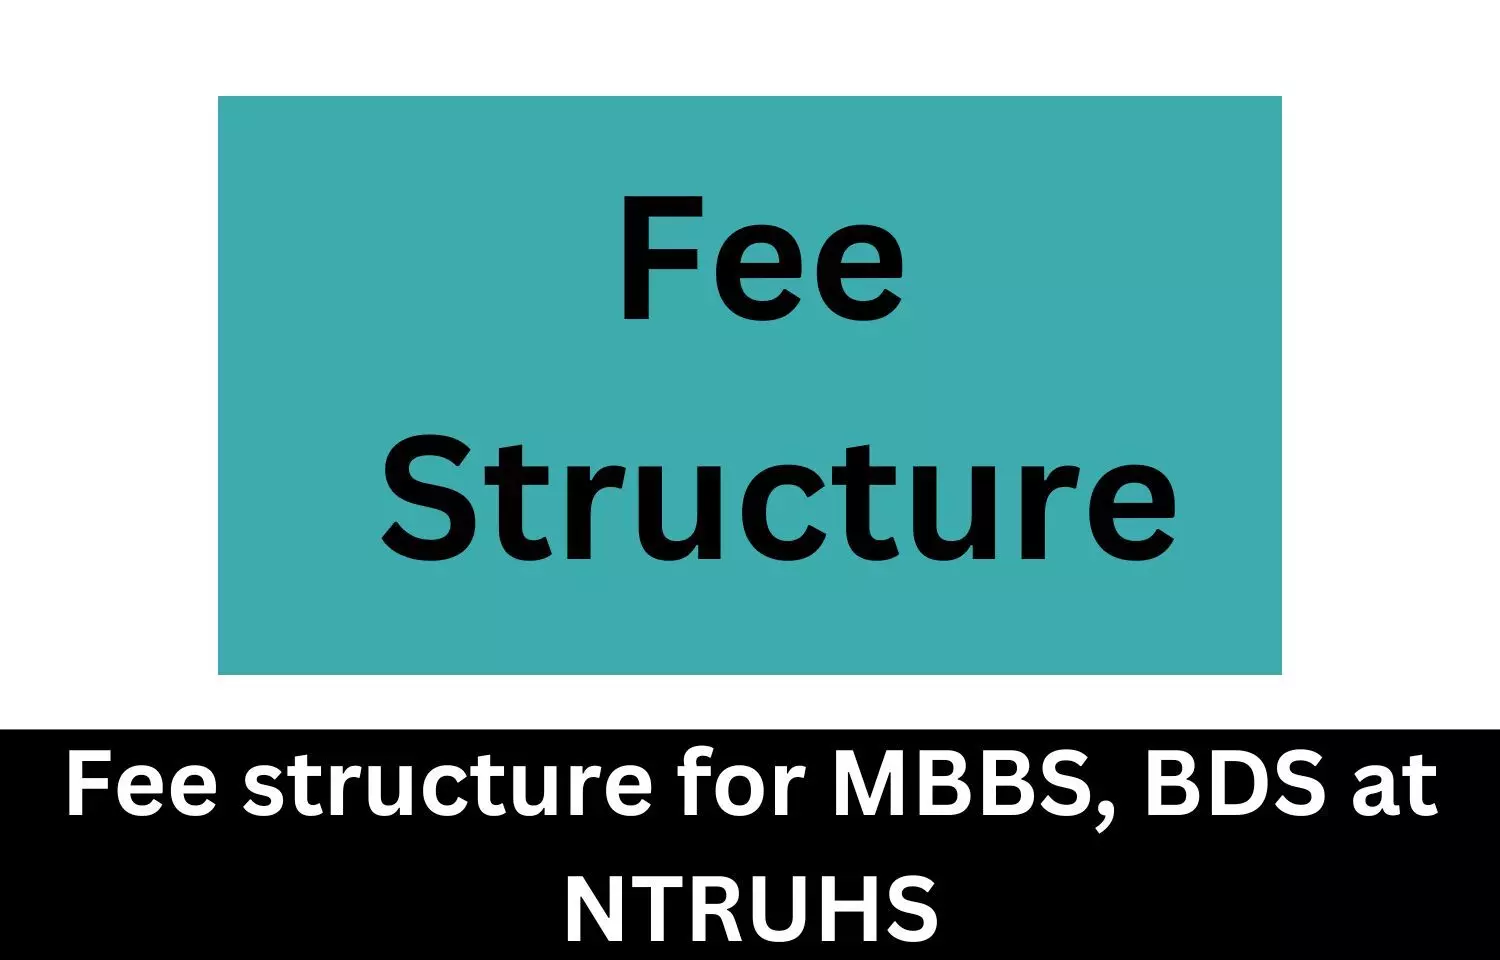 NTRUHS releases fee structure for MBBS, BDS; Details